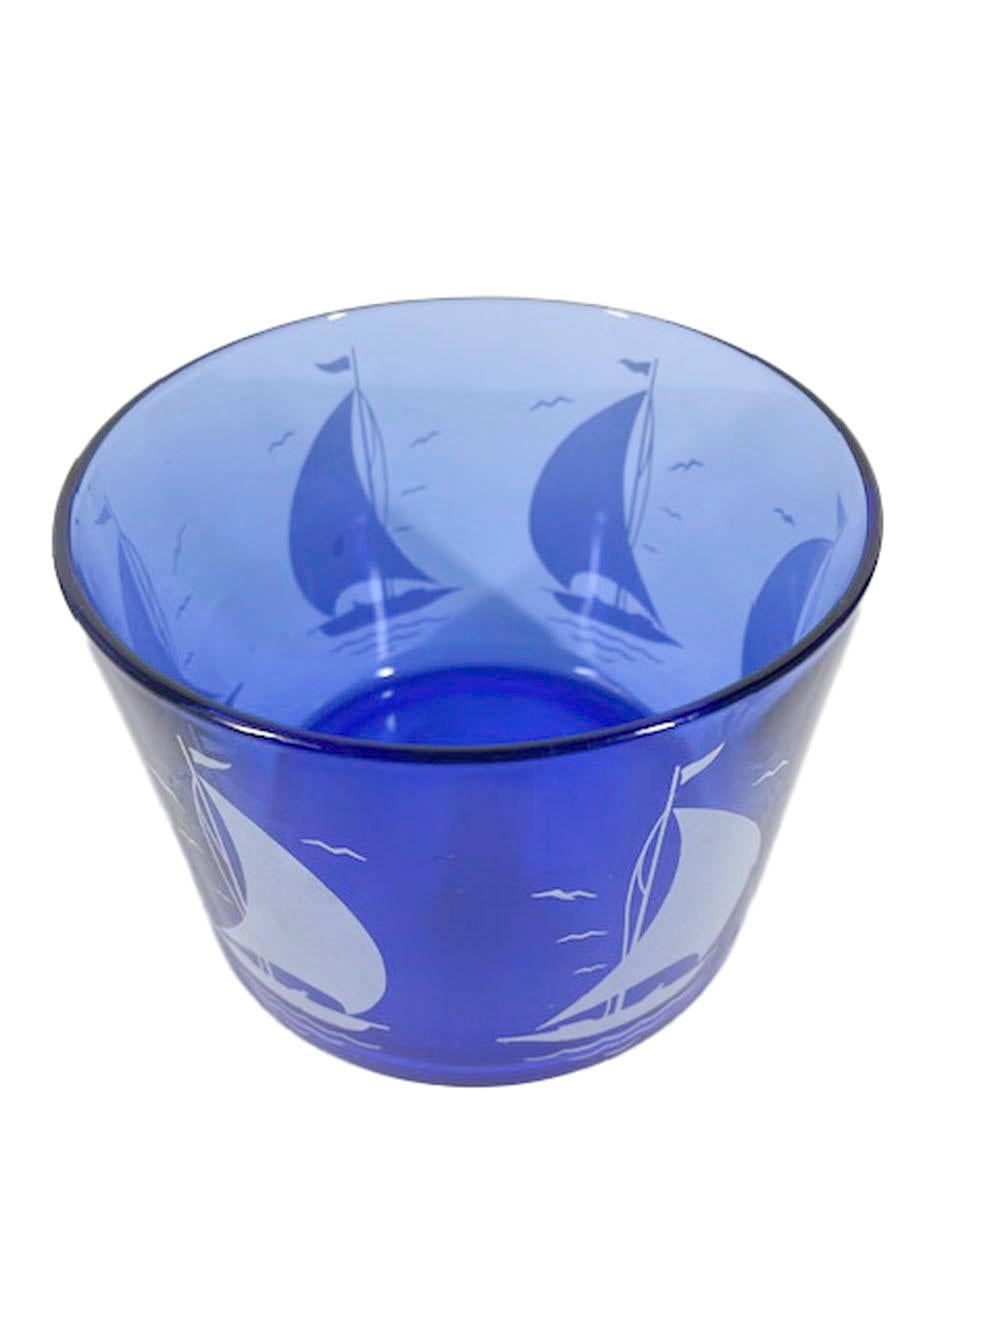 Art Deco cobalt blue glass ice bowl with white sailboats from the Sportsman Series by Hazel-Atlas Glassware.